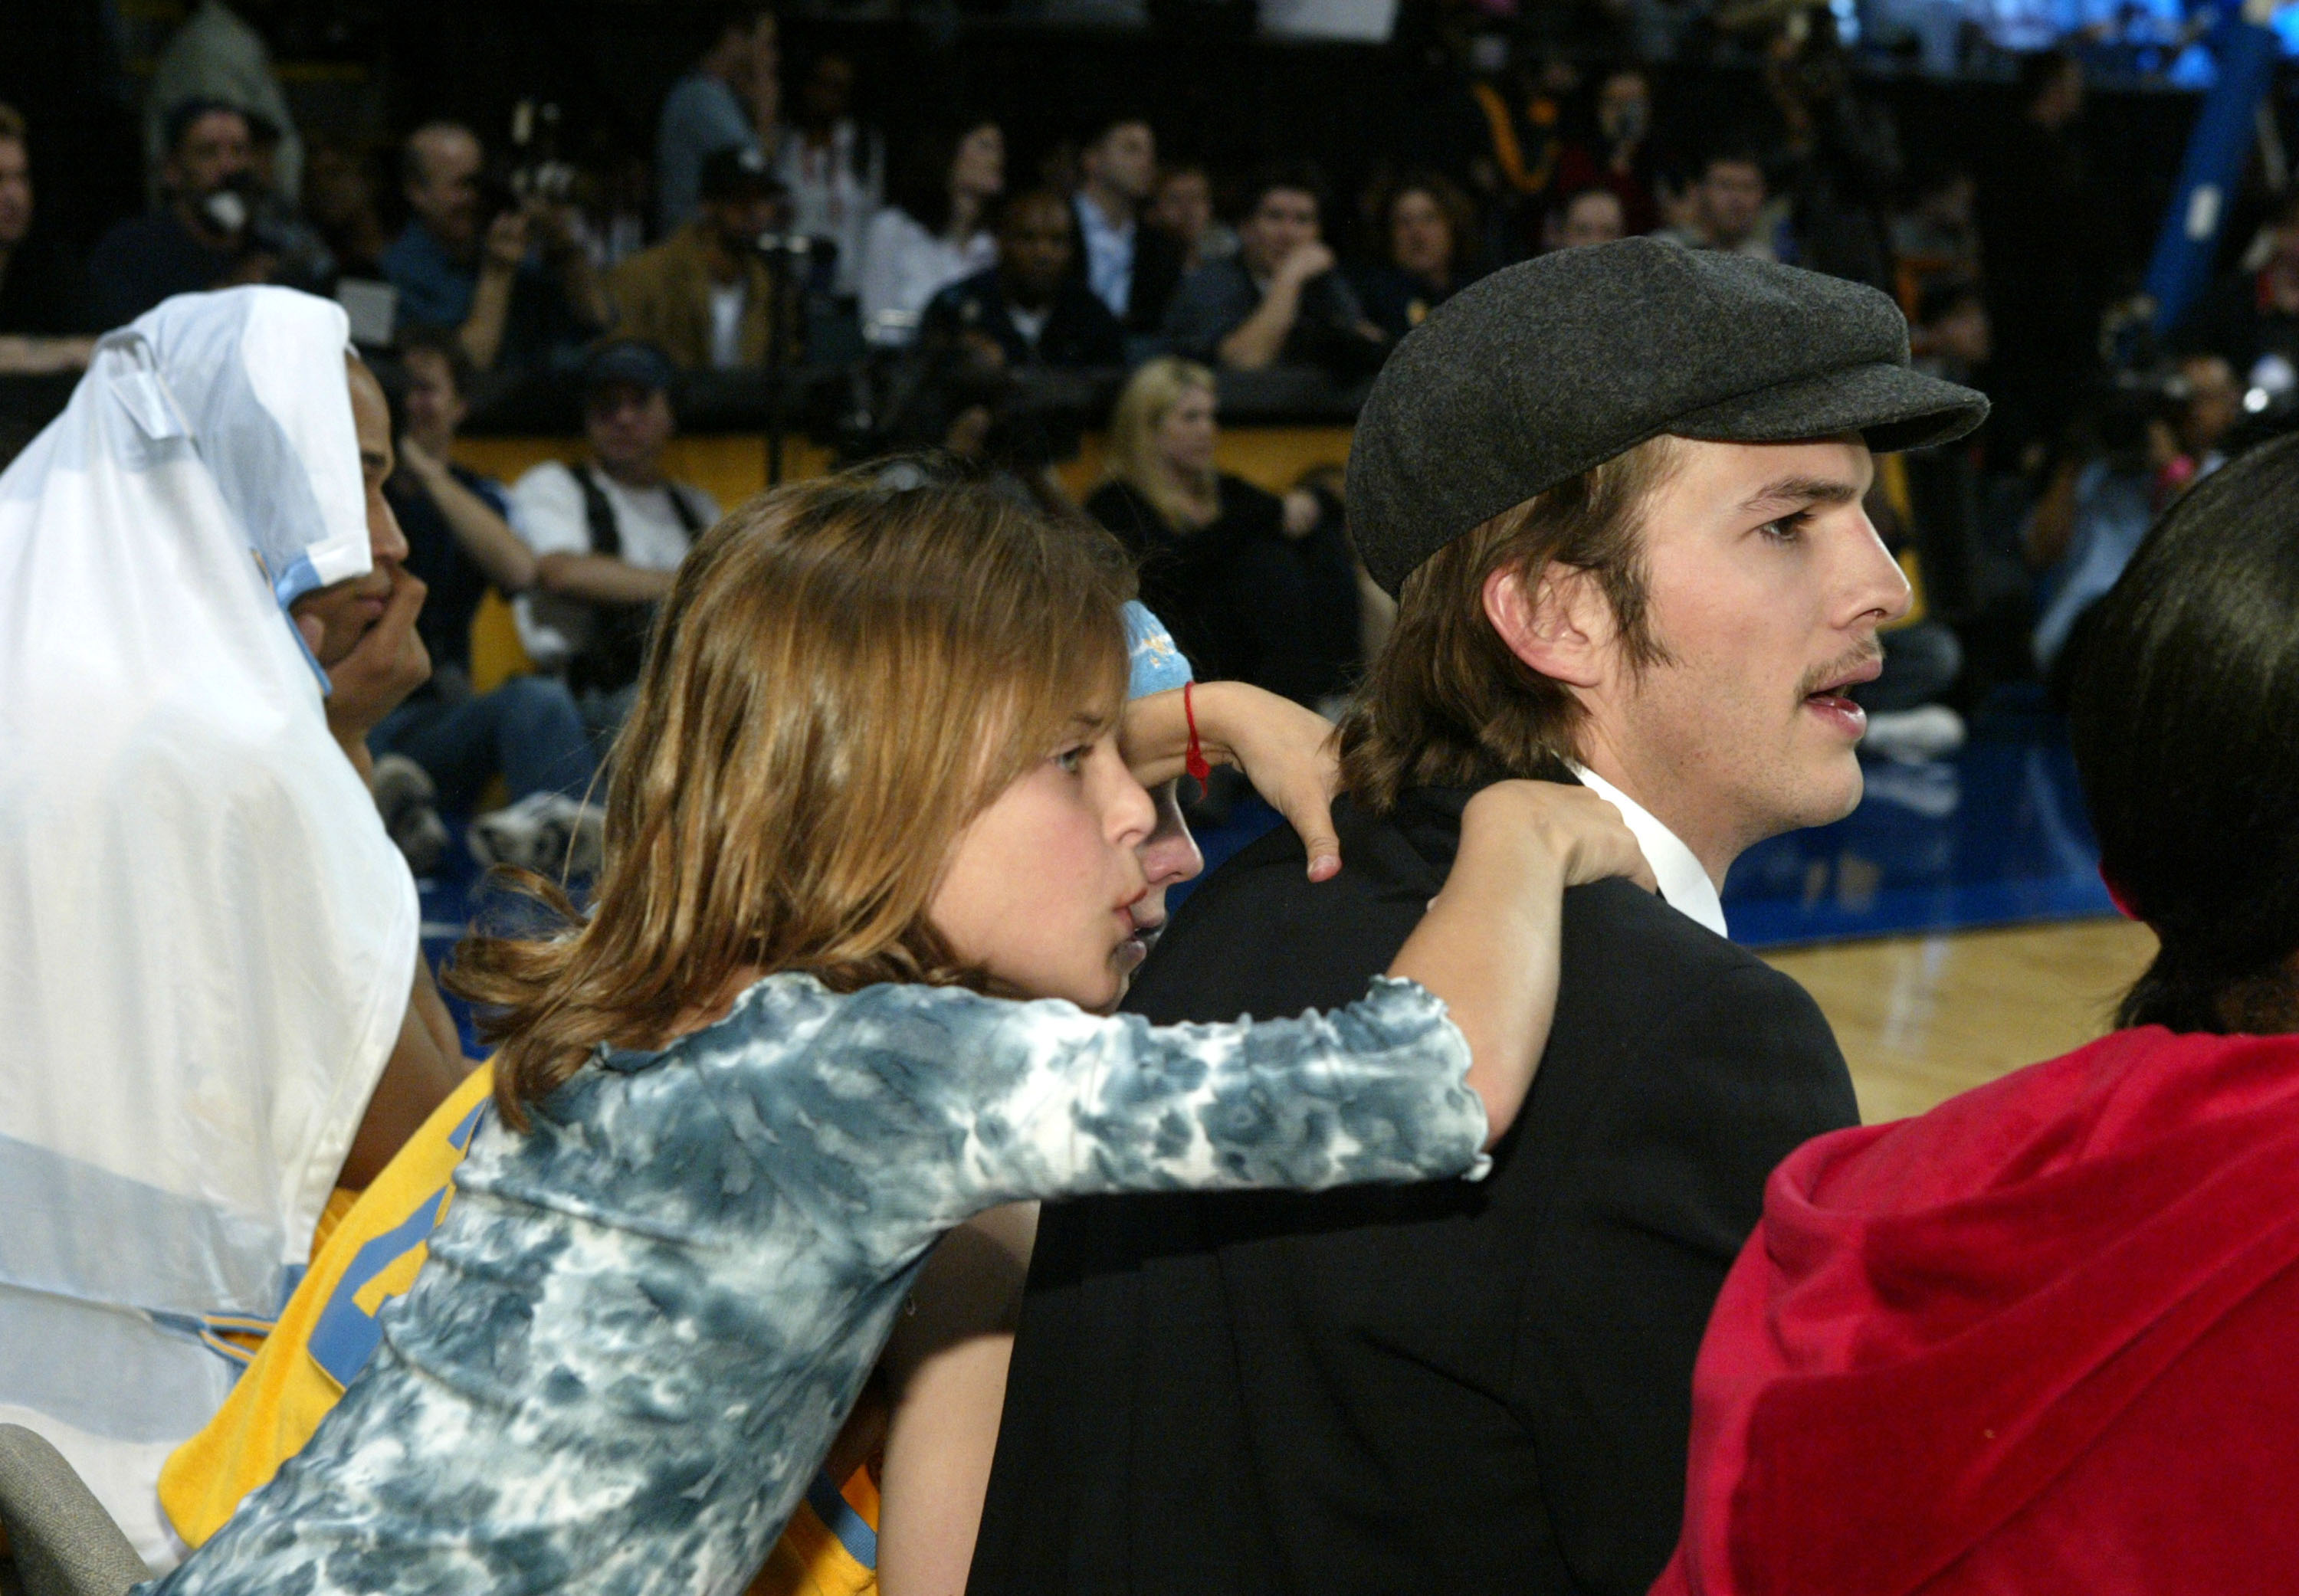 Tallulah Belle Willis and Ashton Kutcher during NBA All-Star Celebrity Game in Los Angeles, California, on February 13, 2004 | Source: Getty Images